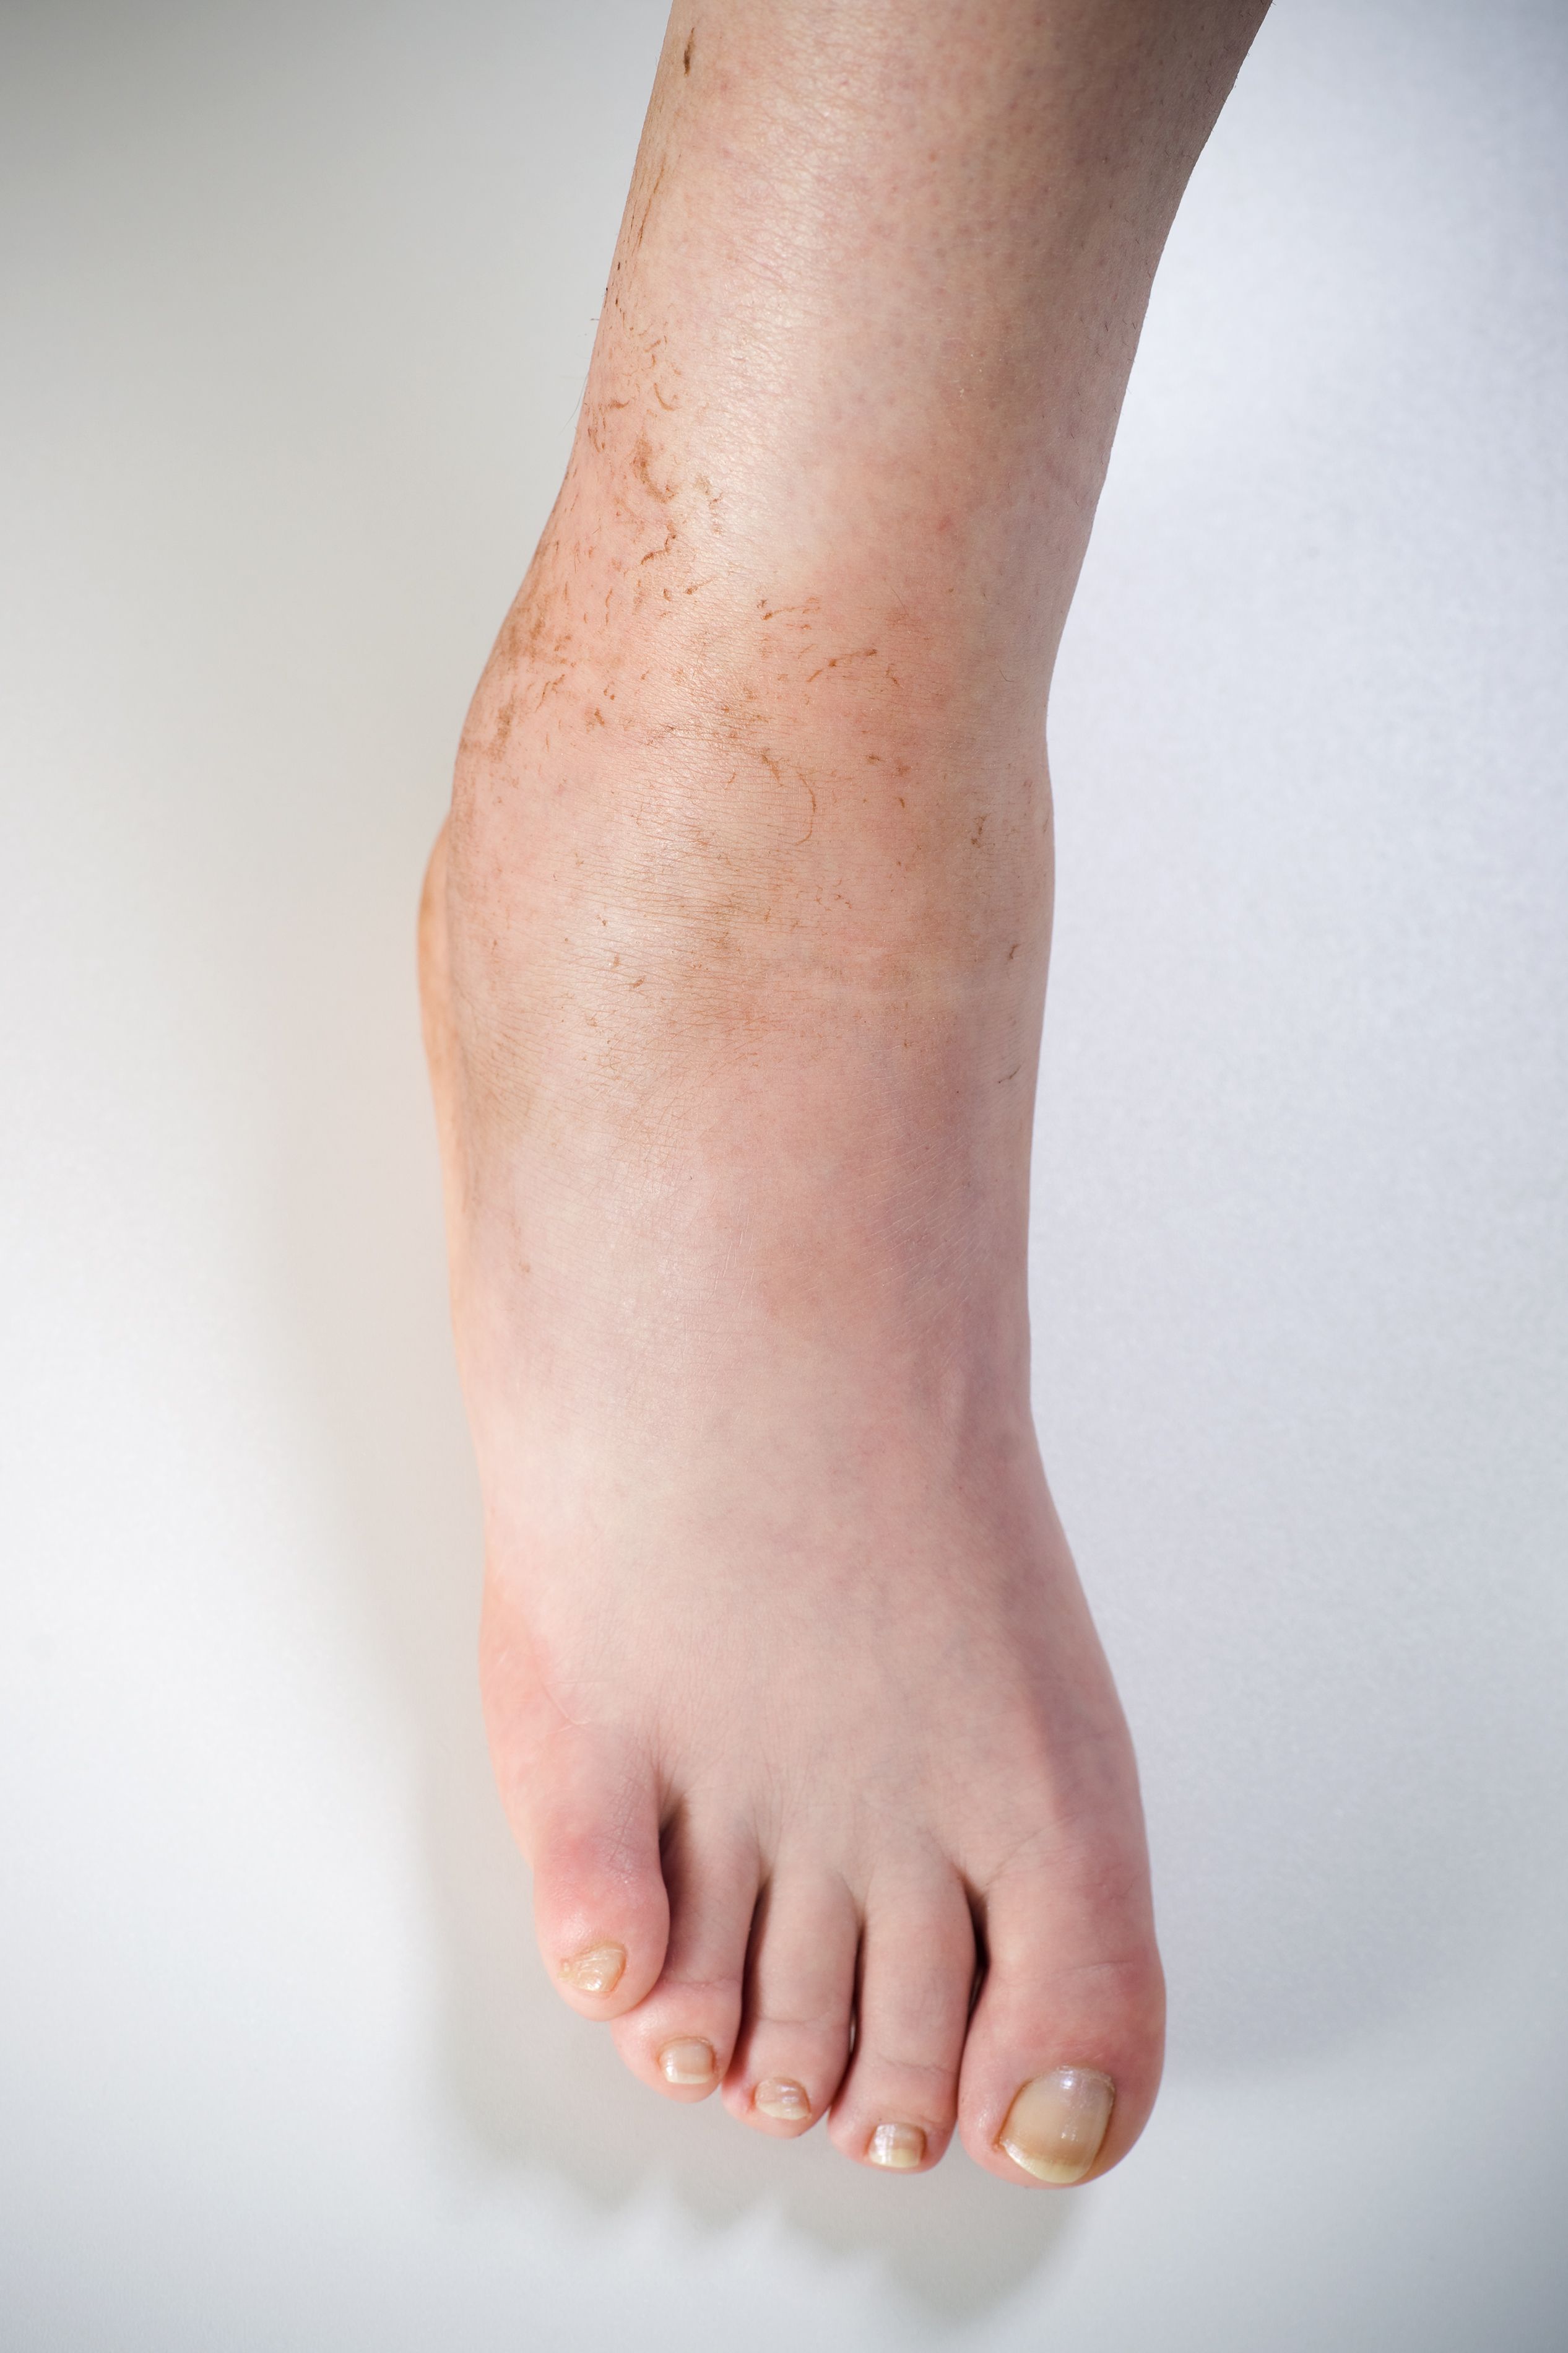 What's causing my feet to swell? - Almawi Limited The Holistic Clinic